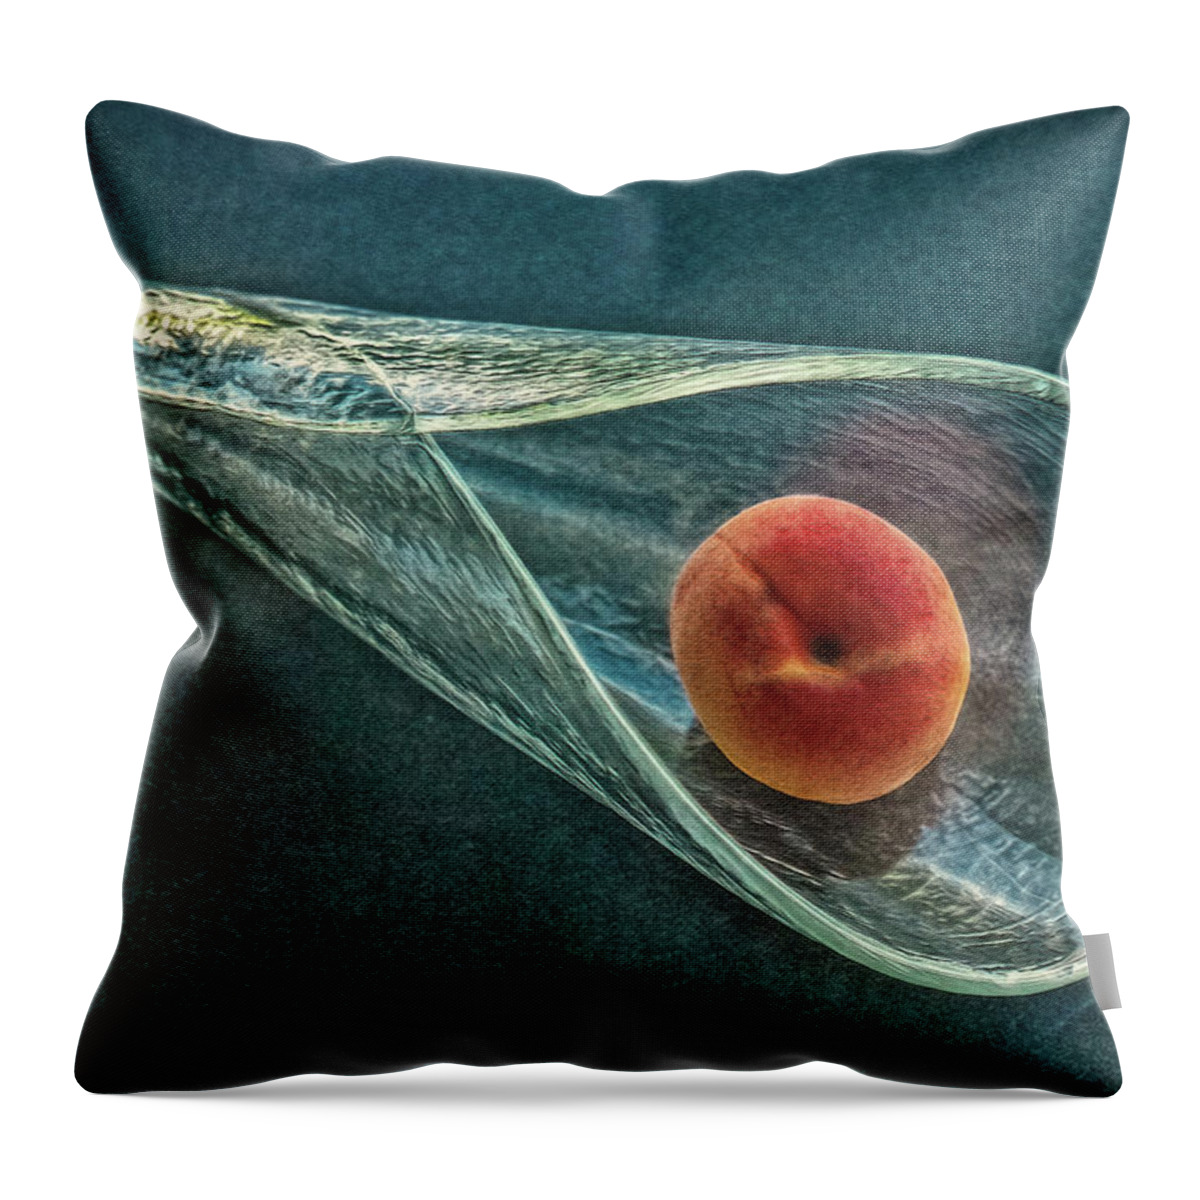 Switzerland Throw Pillow featuring the photograph Peach Cone by Hanny Heim